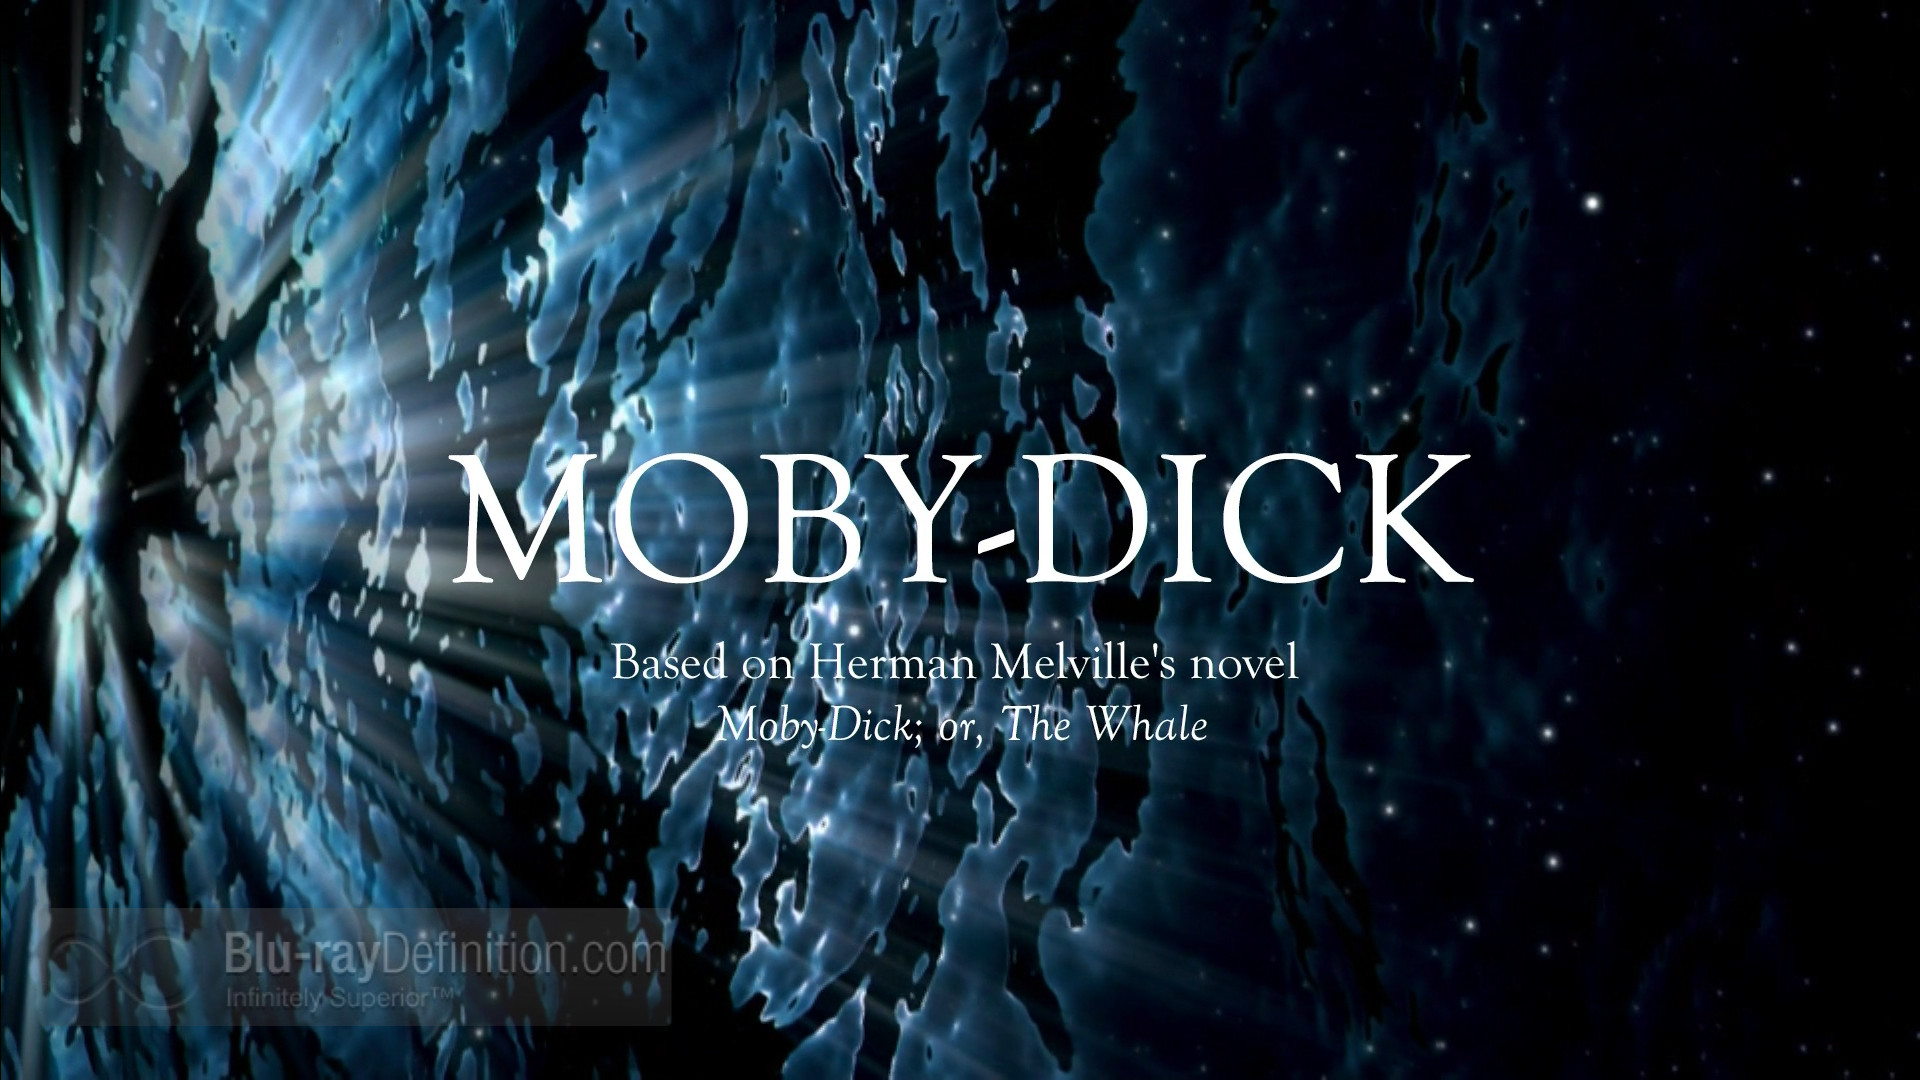 Moby dick jack heggie review